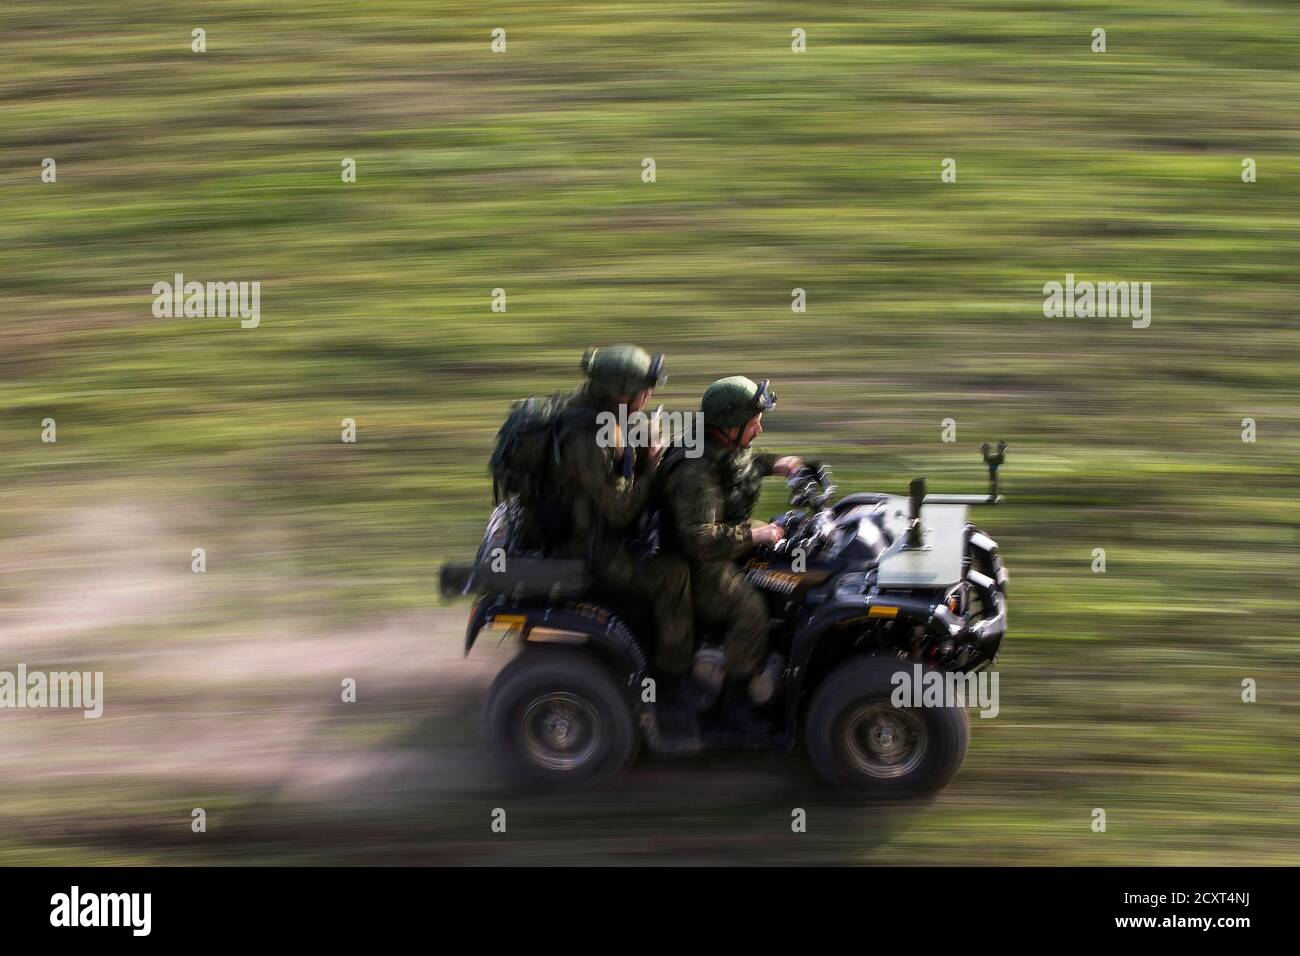 Russian soldiers ride on an all-terrain vehicle during a training exercise  in the village of Nikinci, west from Belgrade, November 14, 2014. Russian  soldiers parachuted into open fields in western Serbia on